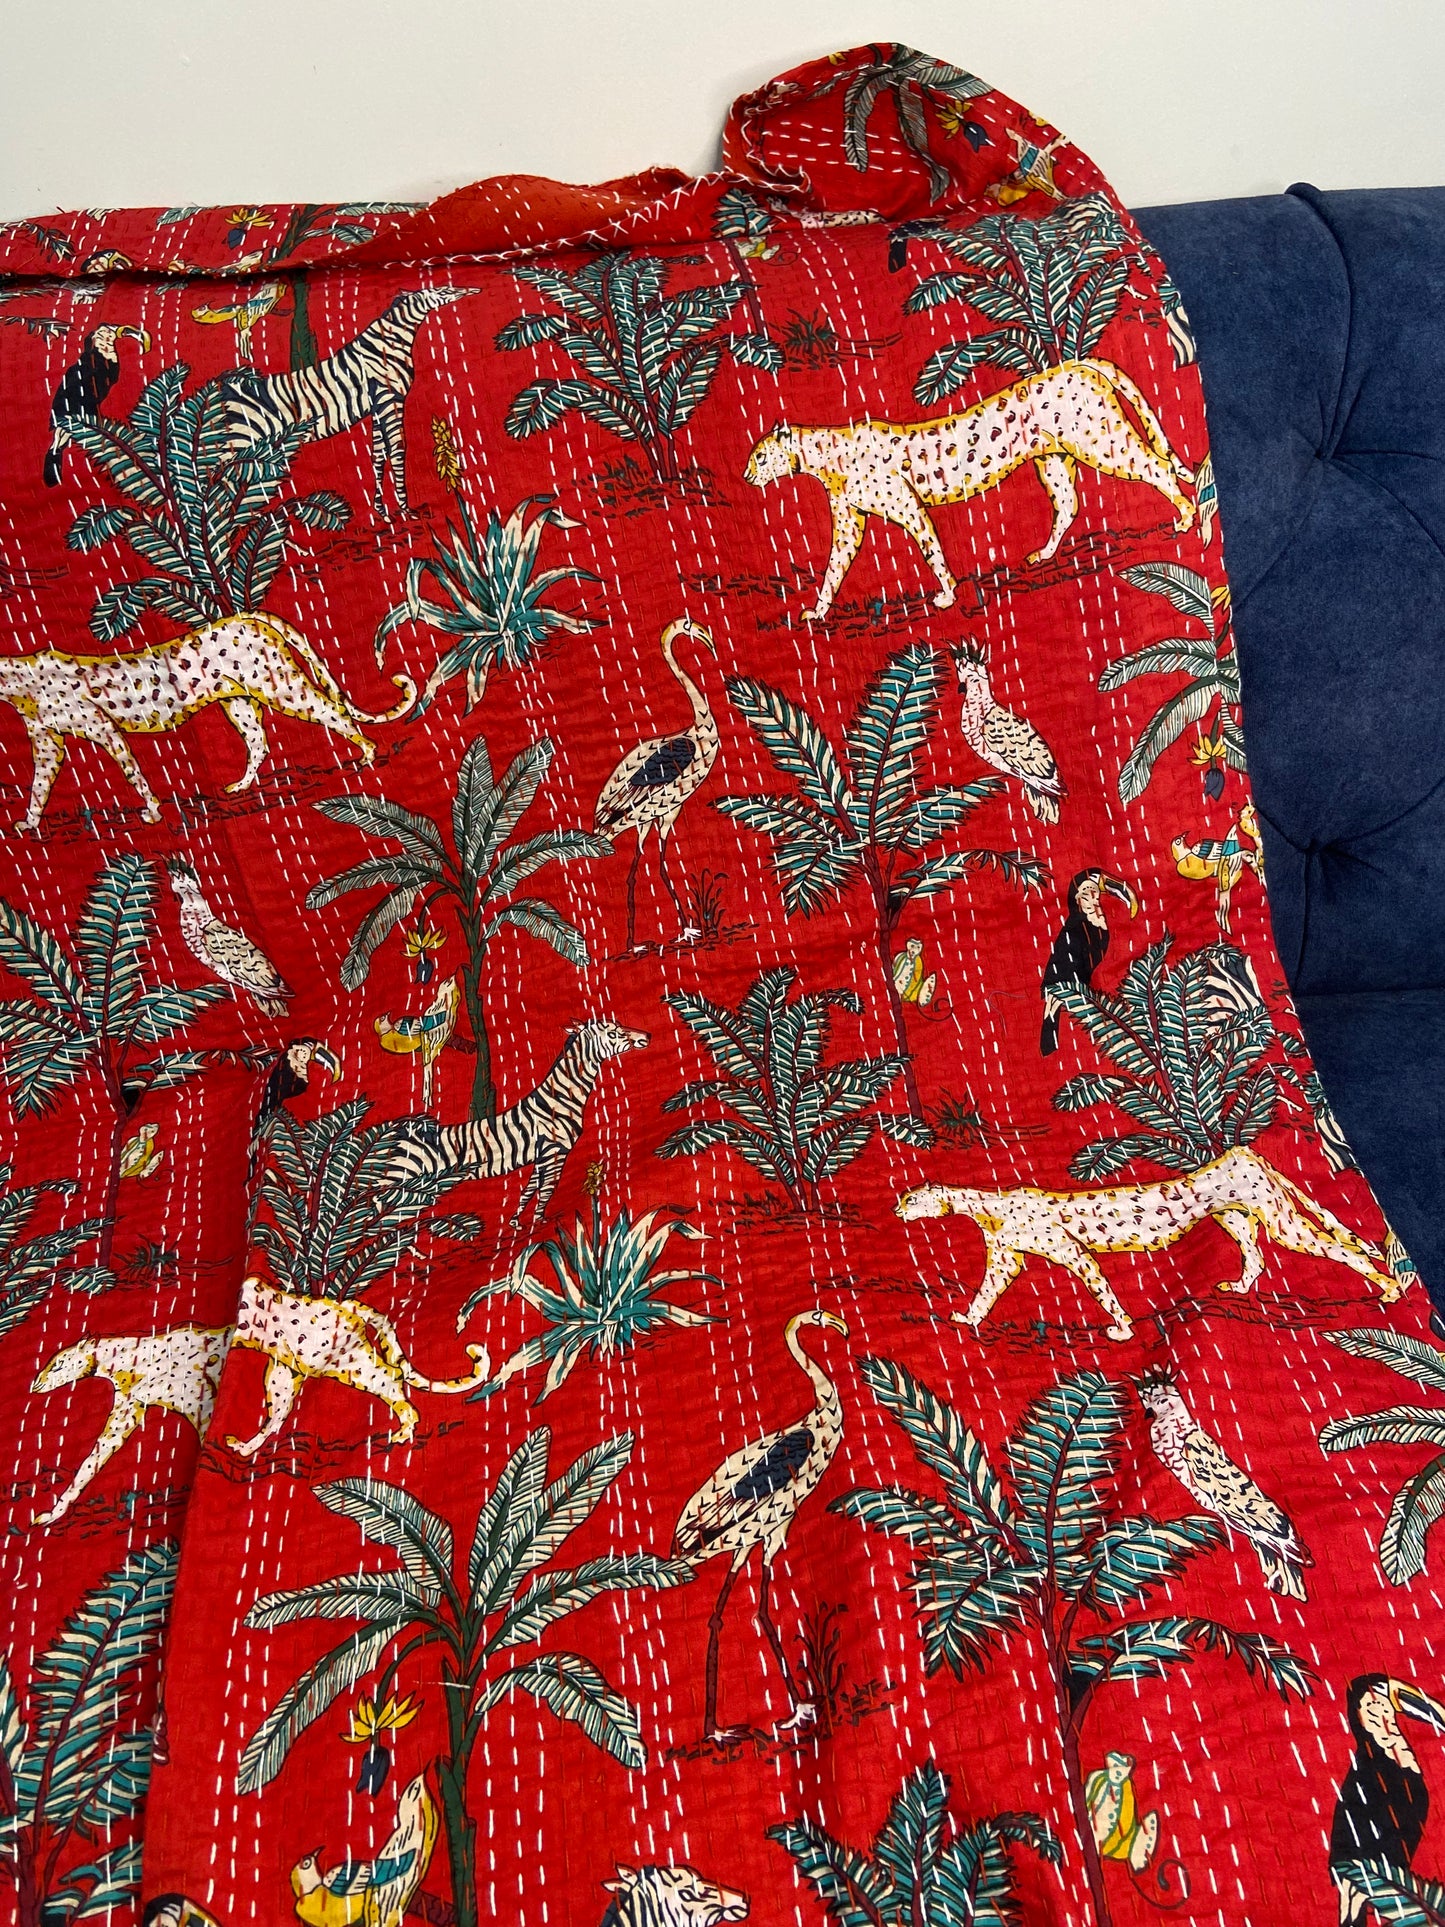 Hot Red Jungle Print Hand Embroidered Bedspread